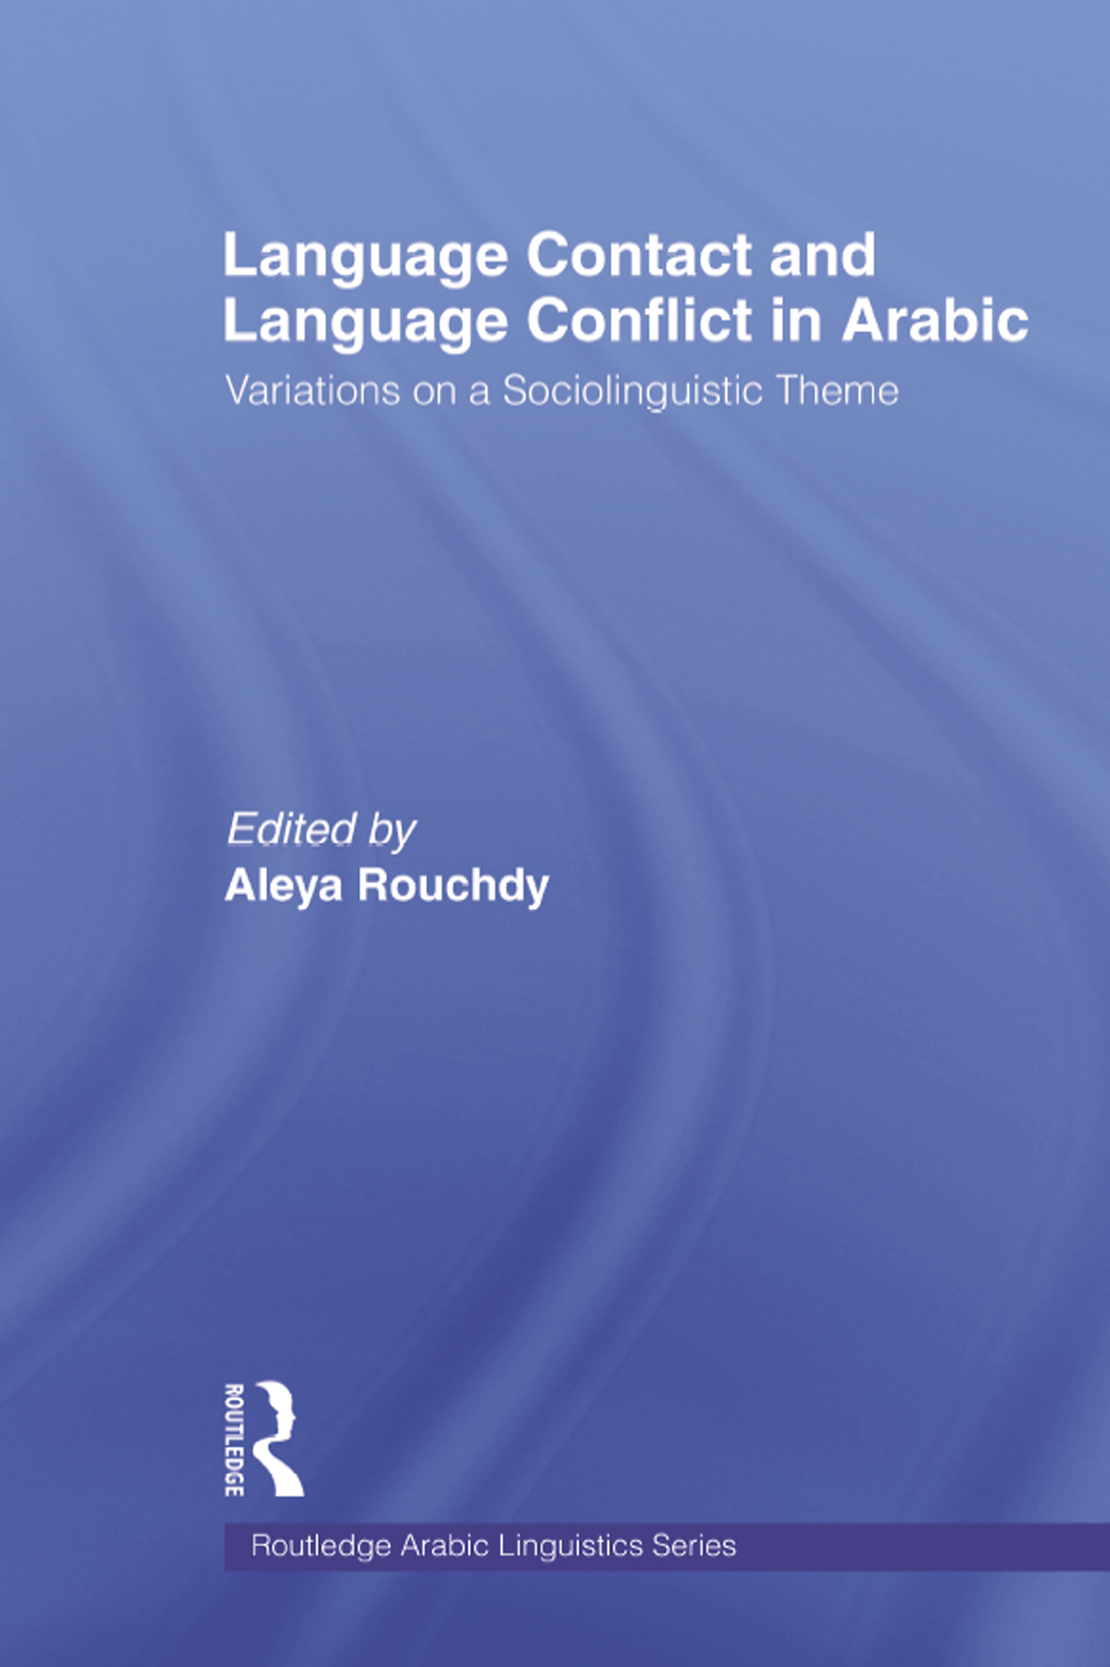 Language Contact and Language Conflict in Arabic Routledge Arabic - photo 1